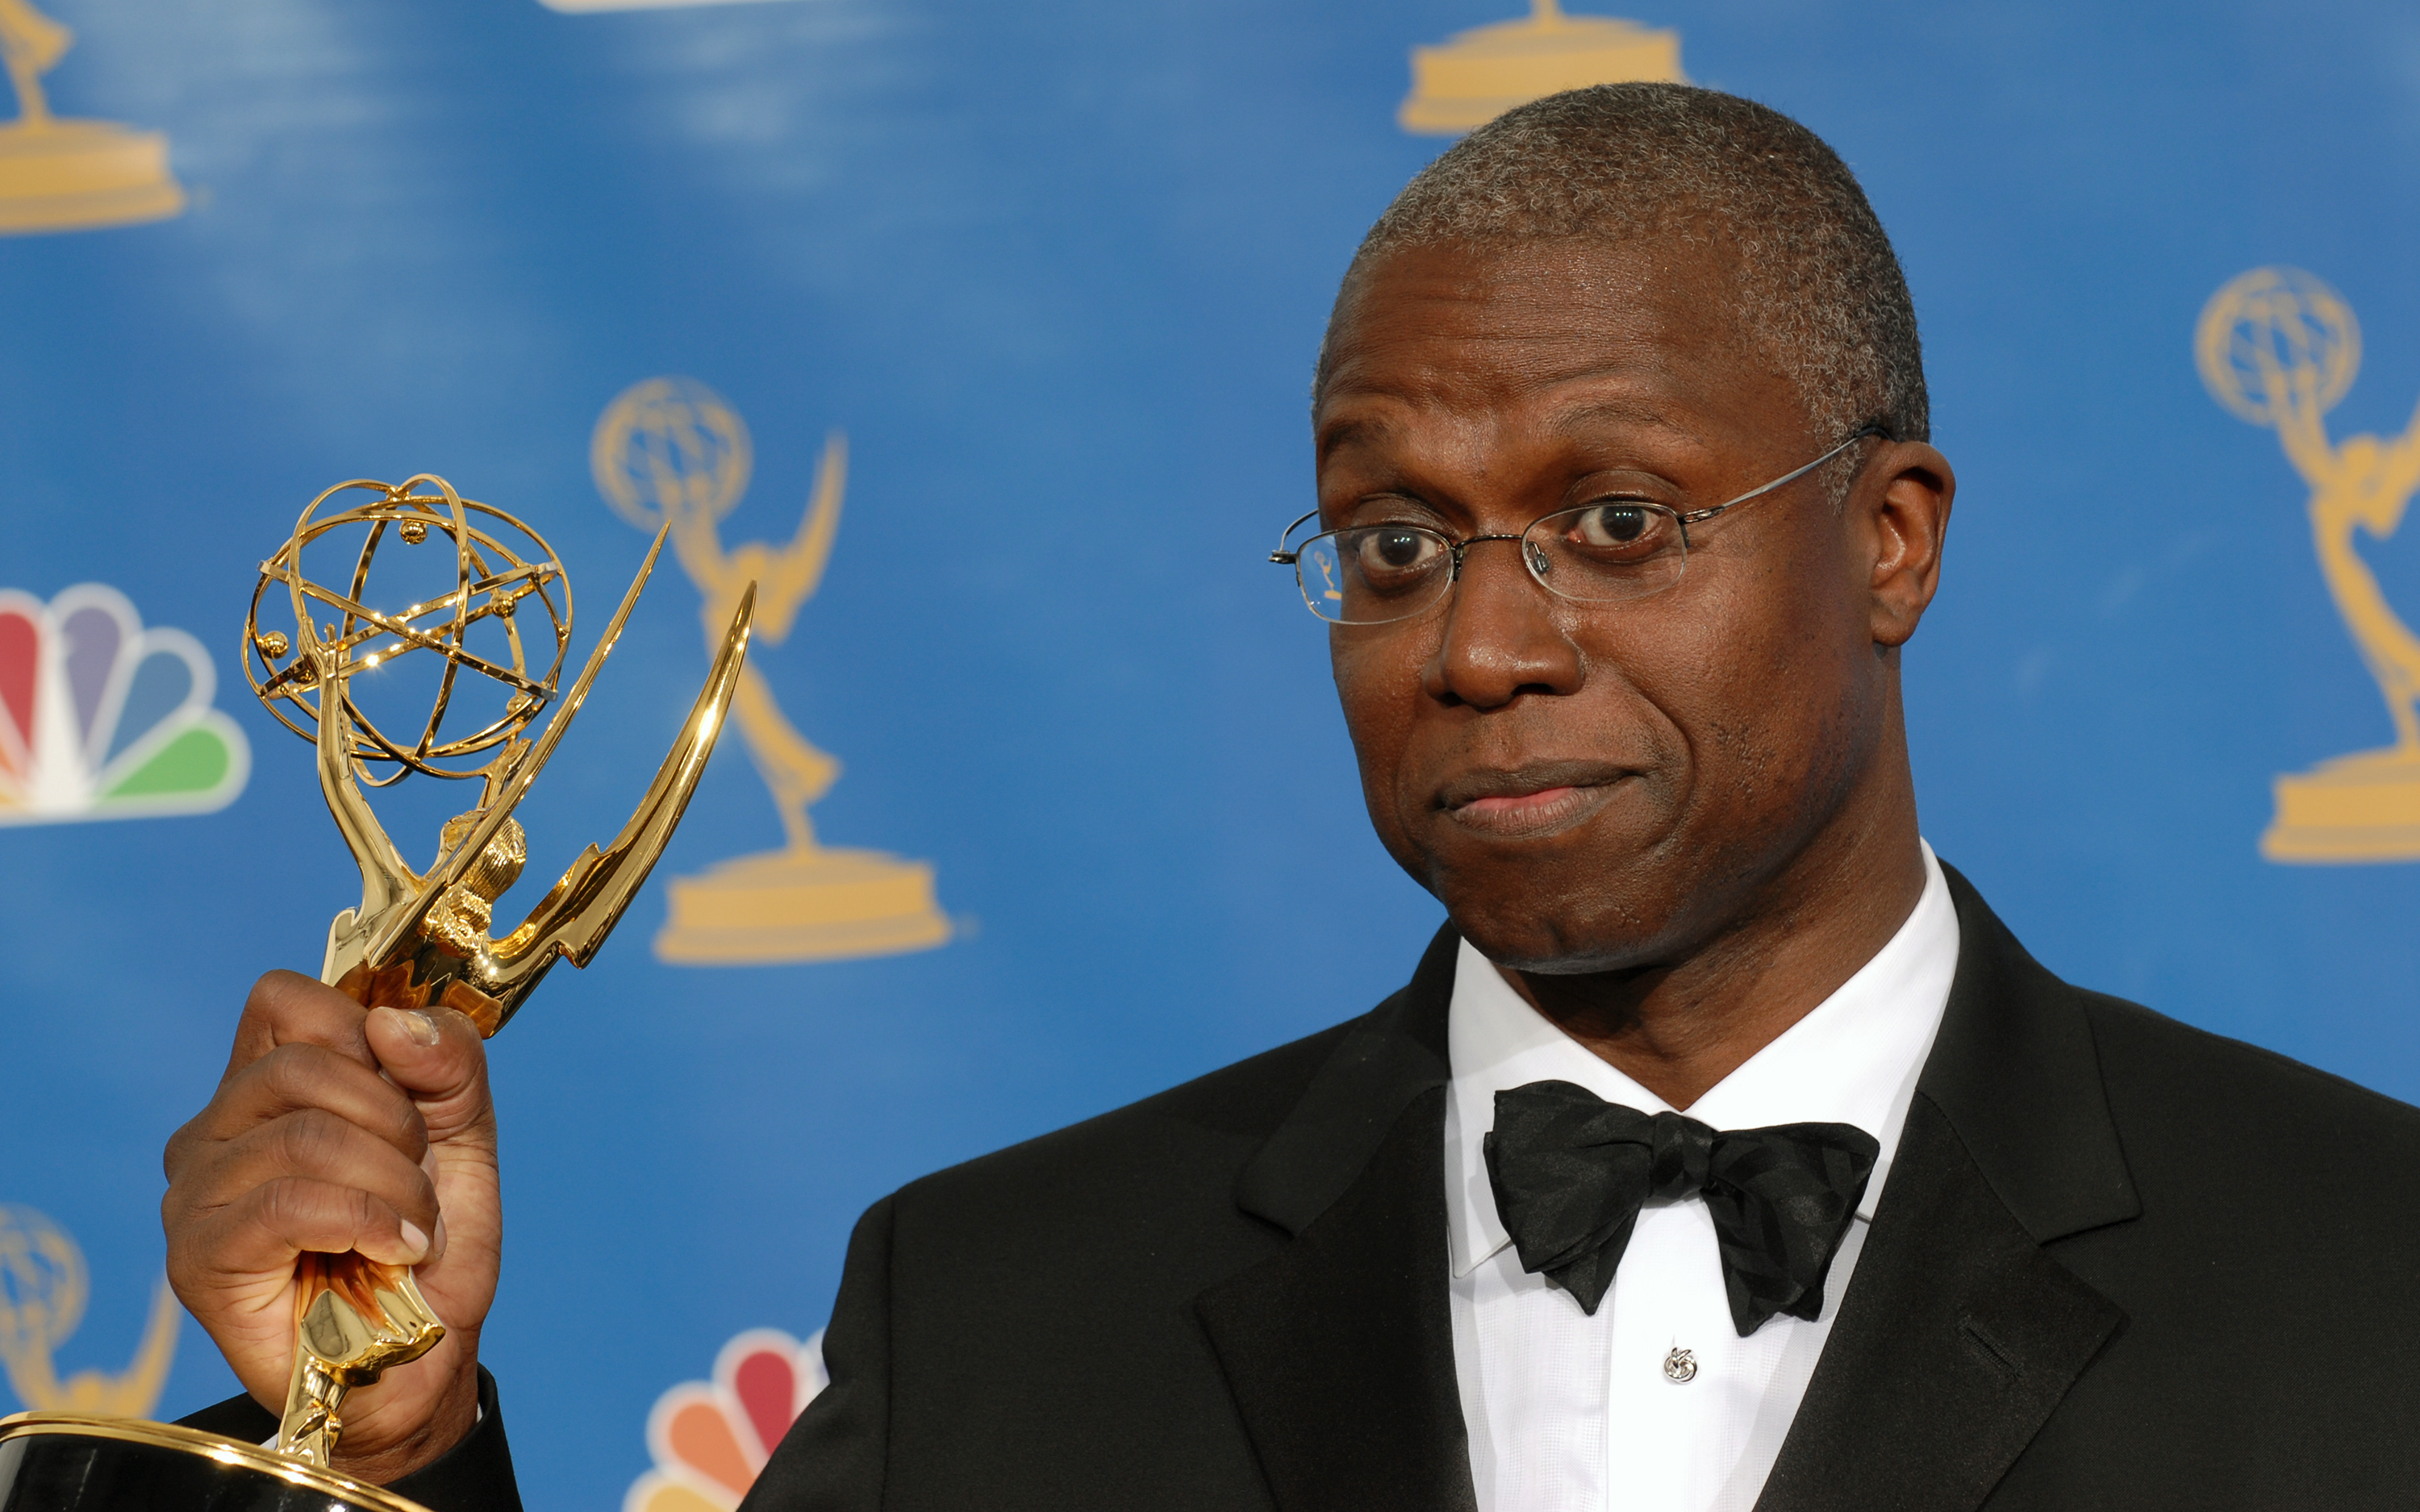 Andre Braugher at the Emmy Awards Show in Los Angeles, California on August 27 2006 | Source: Getty Images